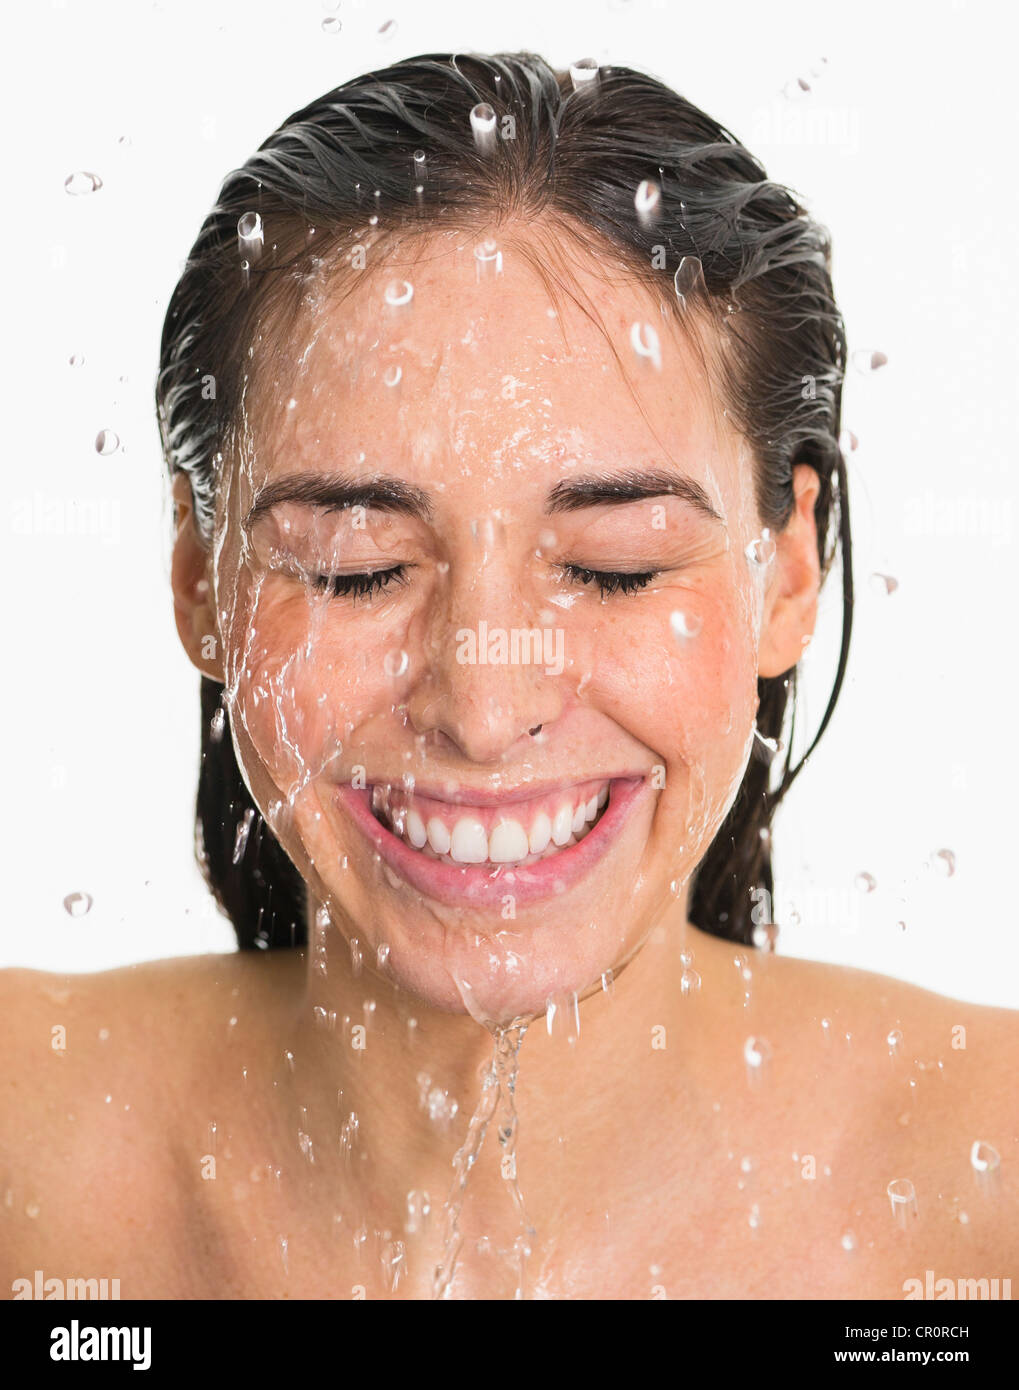 Studio shot of woman with splash of water on face Stock Photo